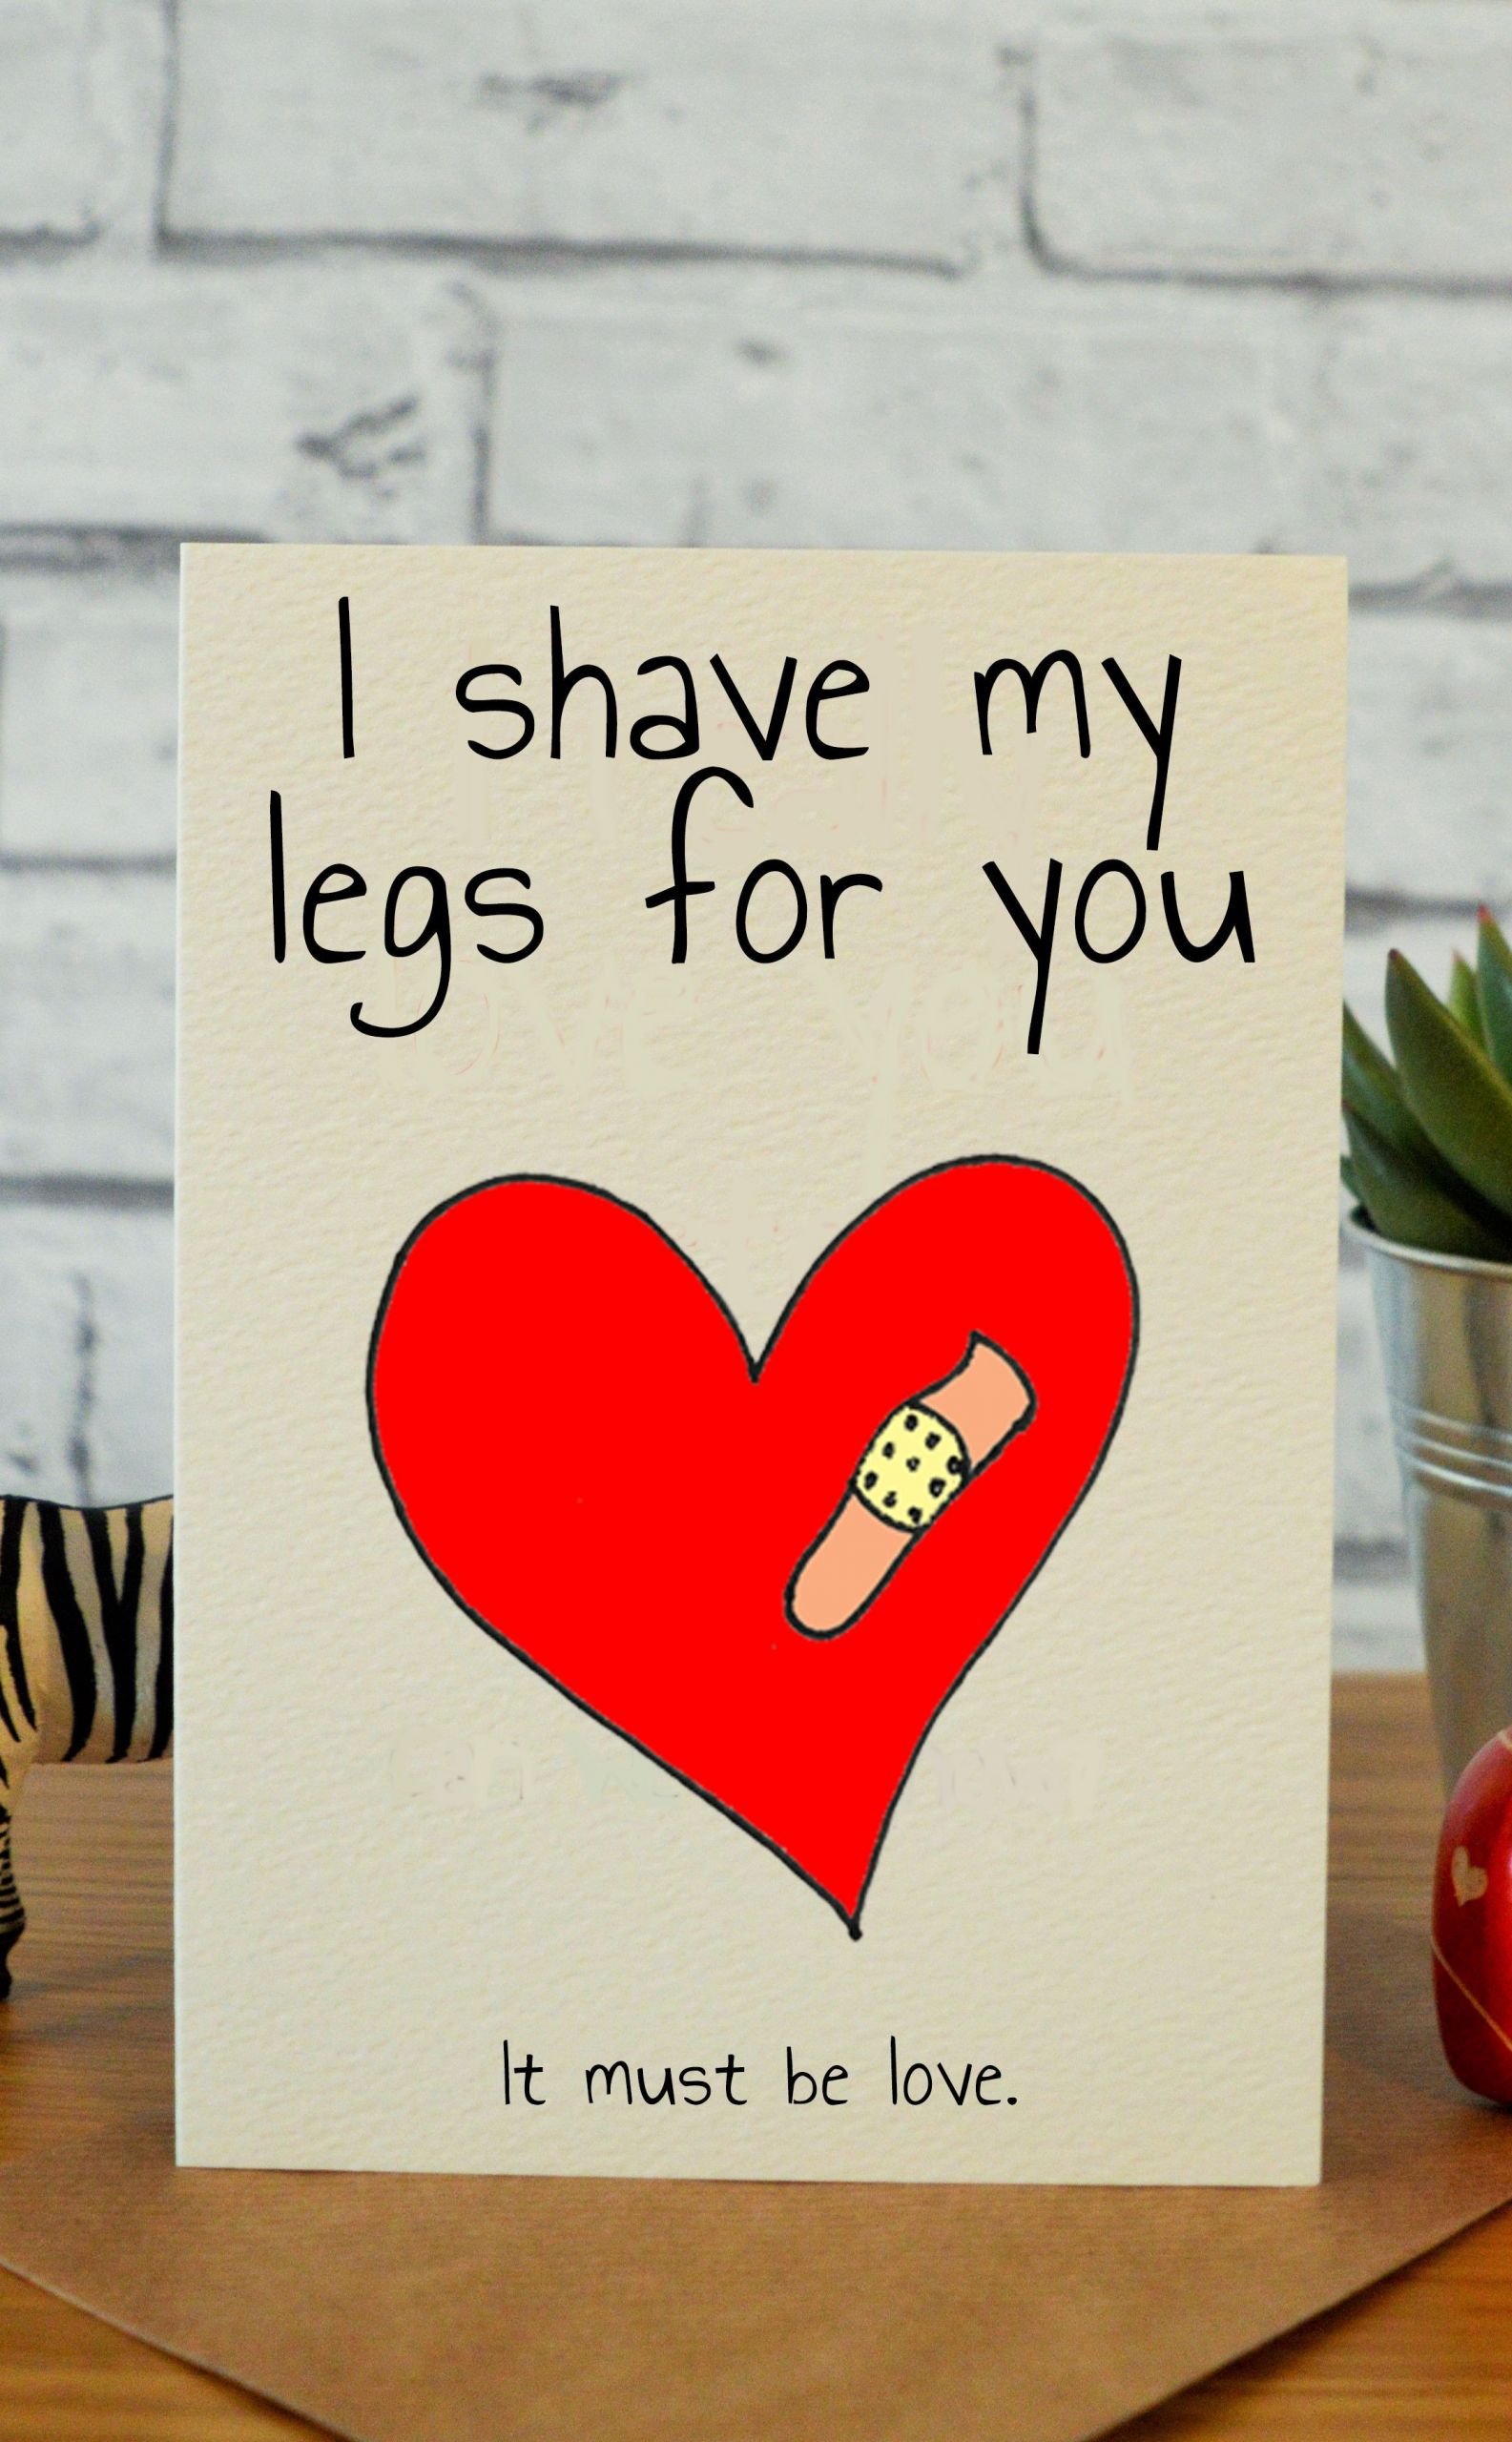 Valentines Day Cards Ideas For Him
 Funny anniversary cards funny valentines day cards